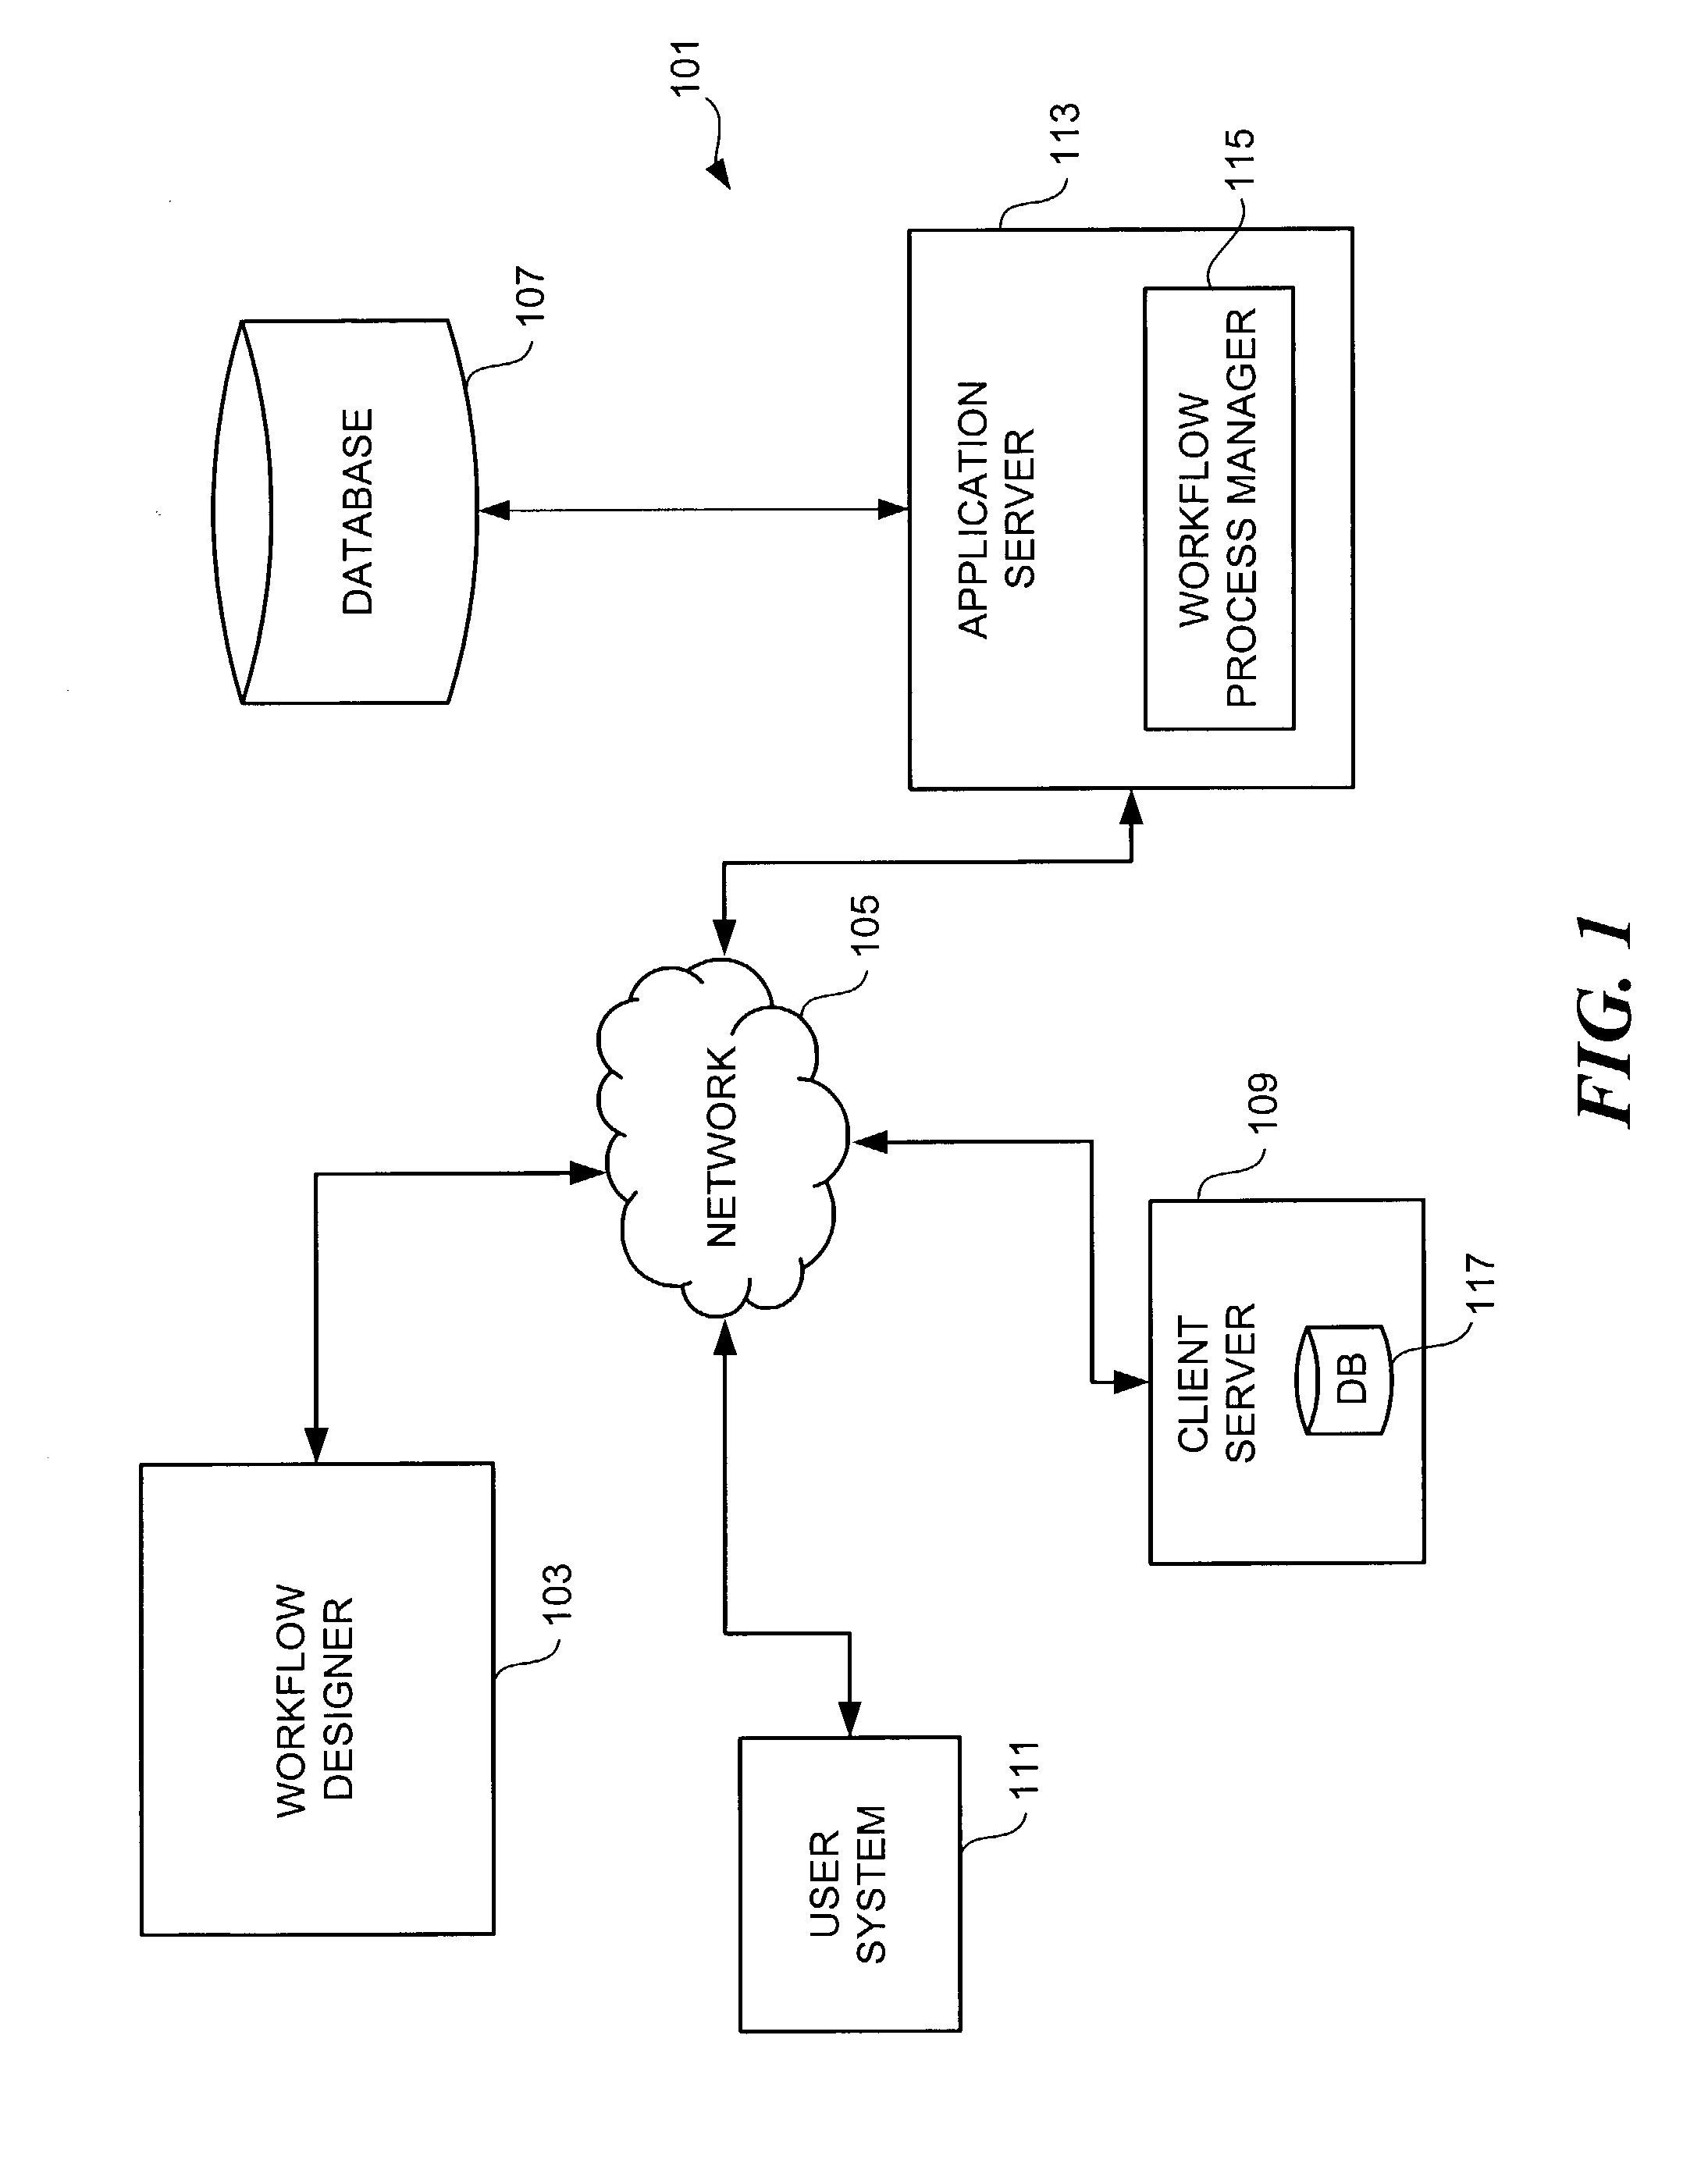 Method and apparatus for controlling view navigation in workflow systems